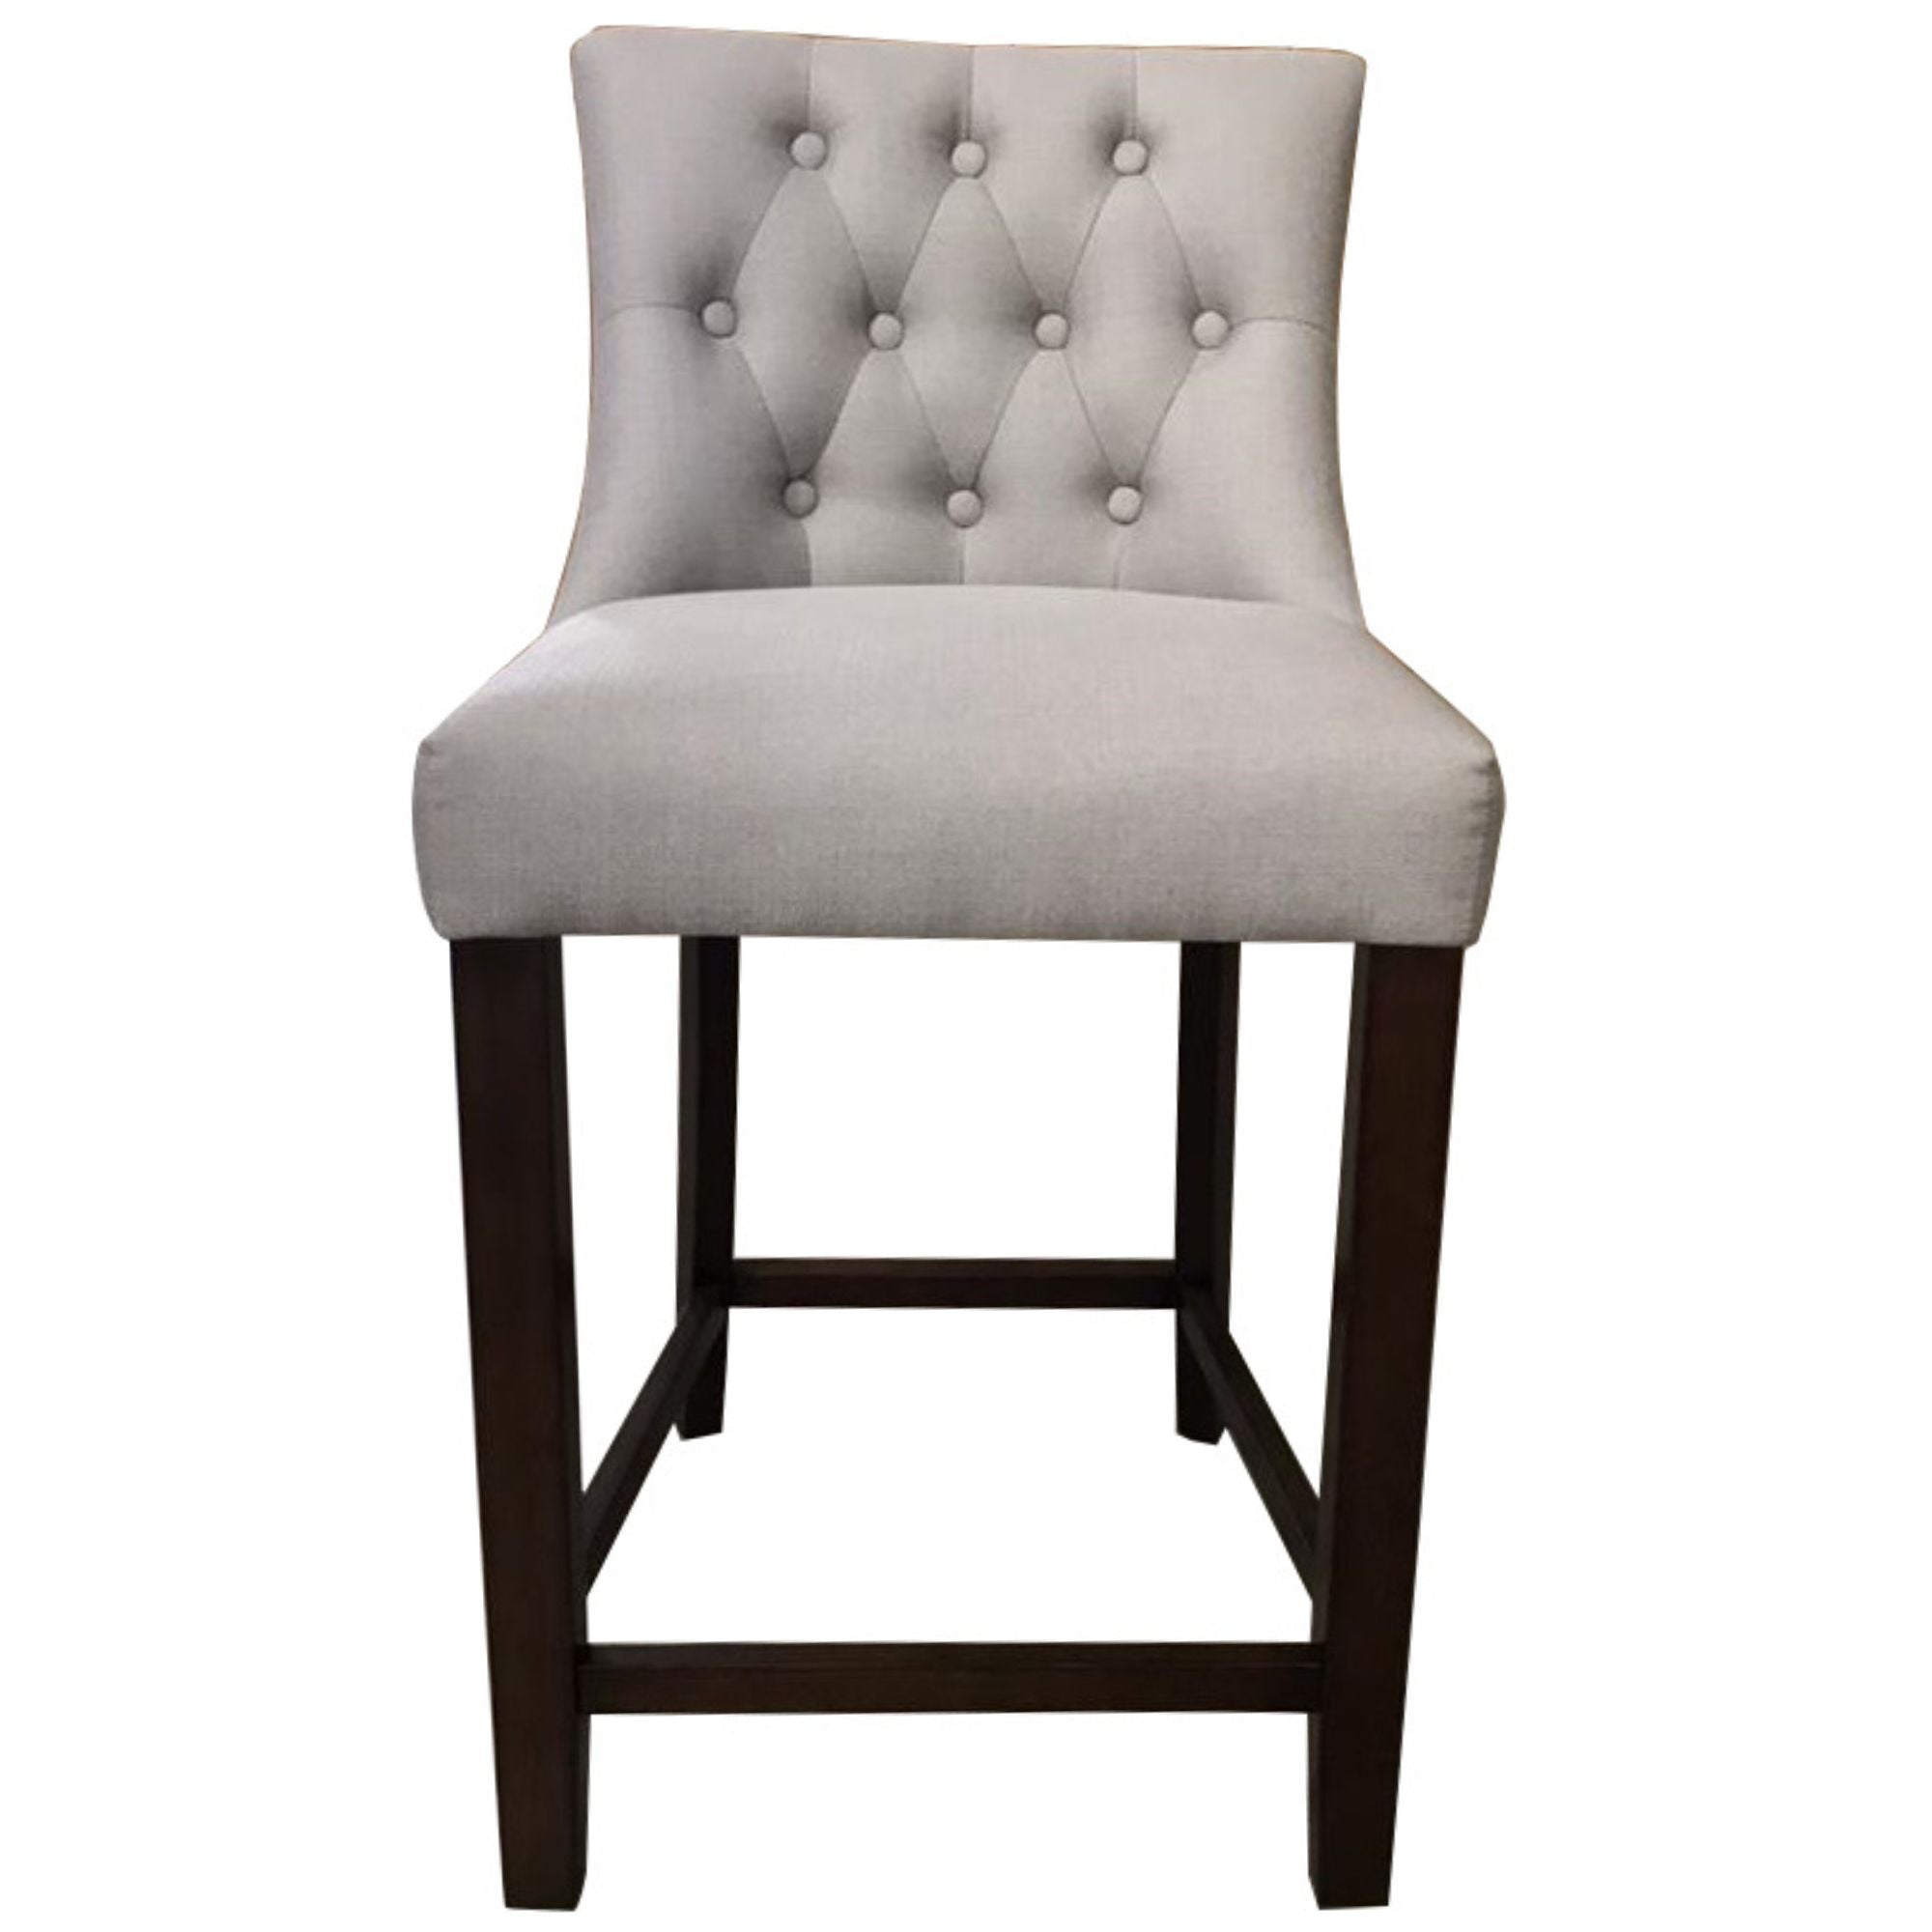 3pc High Fabric Dining Chair Bar Stool French Provincial Solid Timber